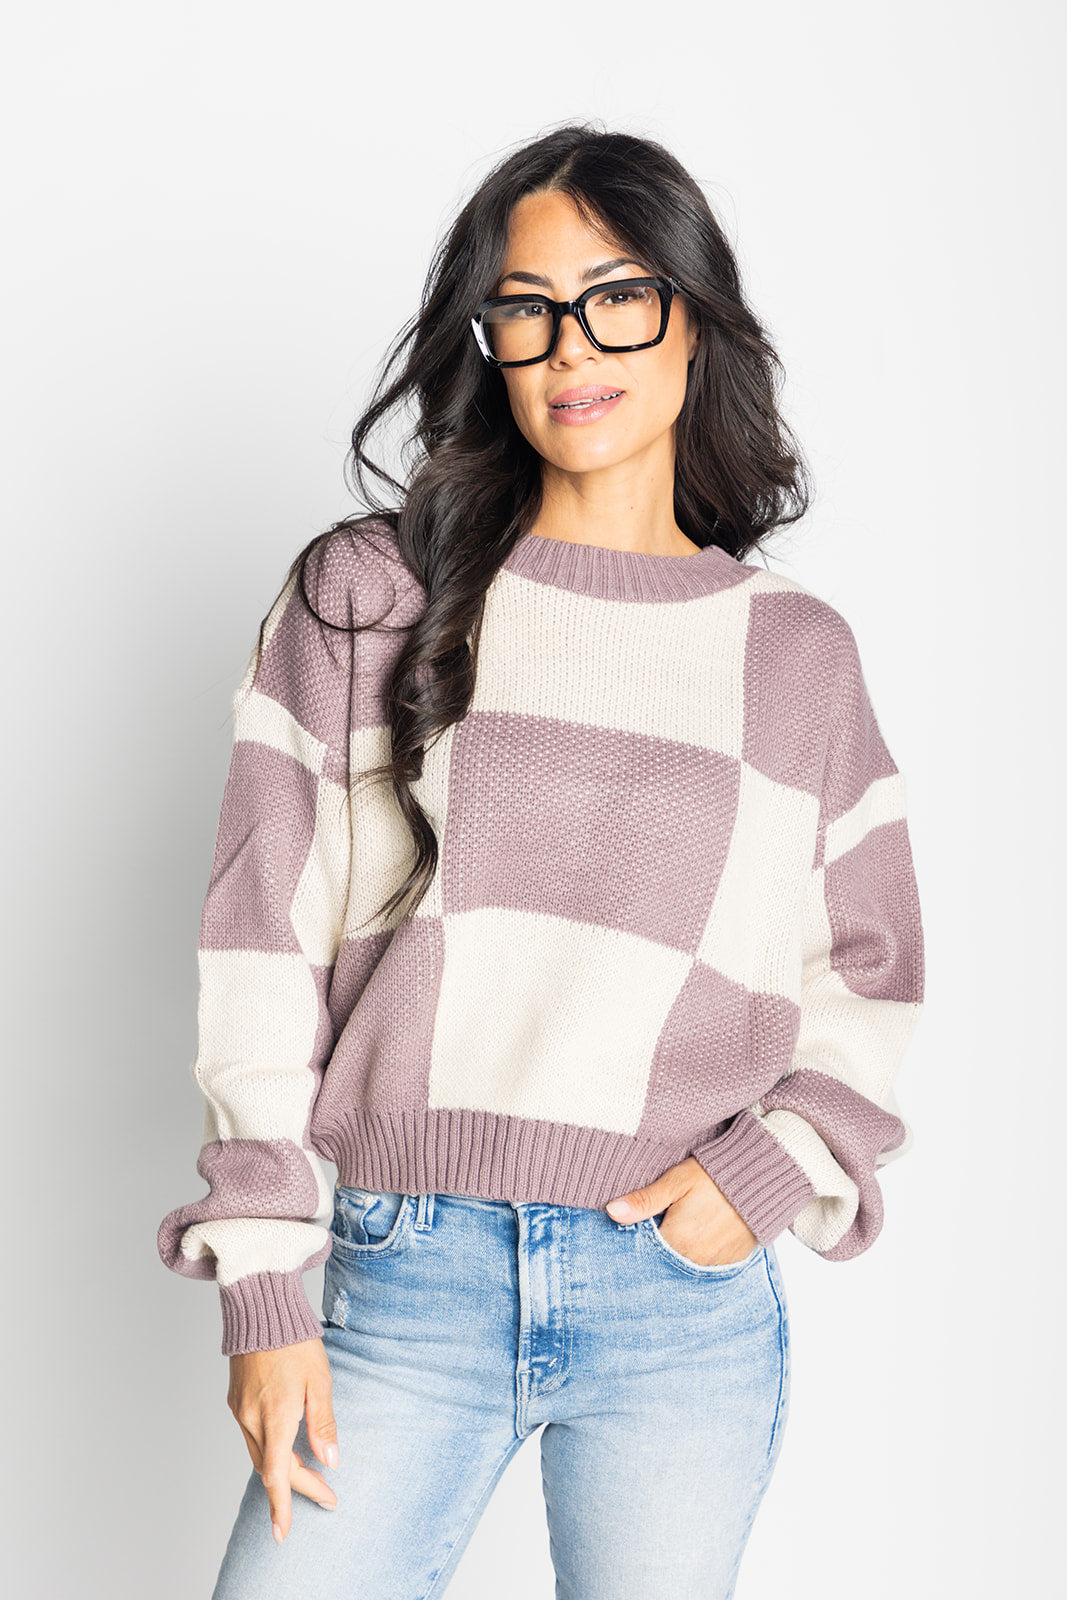 I'm Amused Checkered Sweater *2 colors*